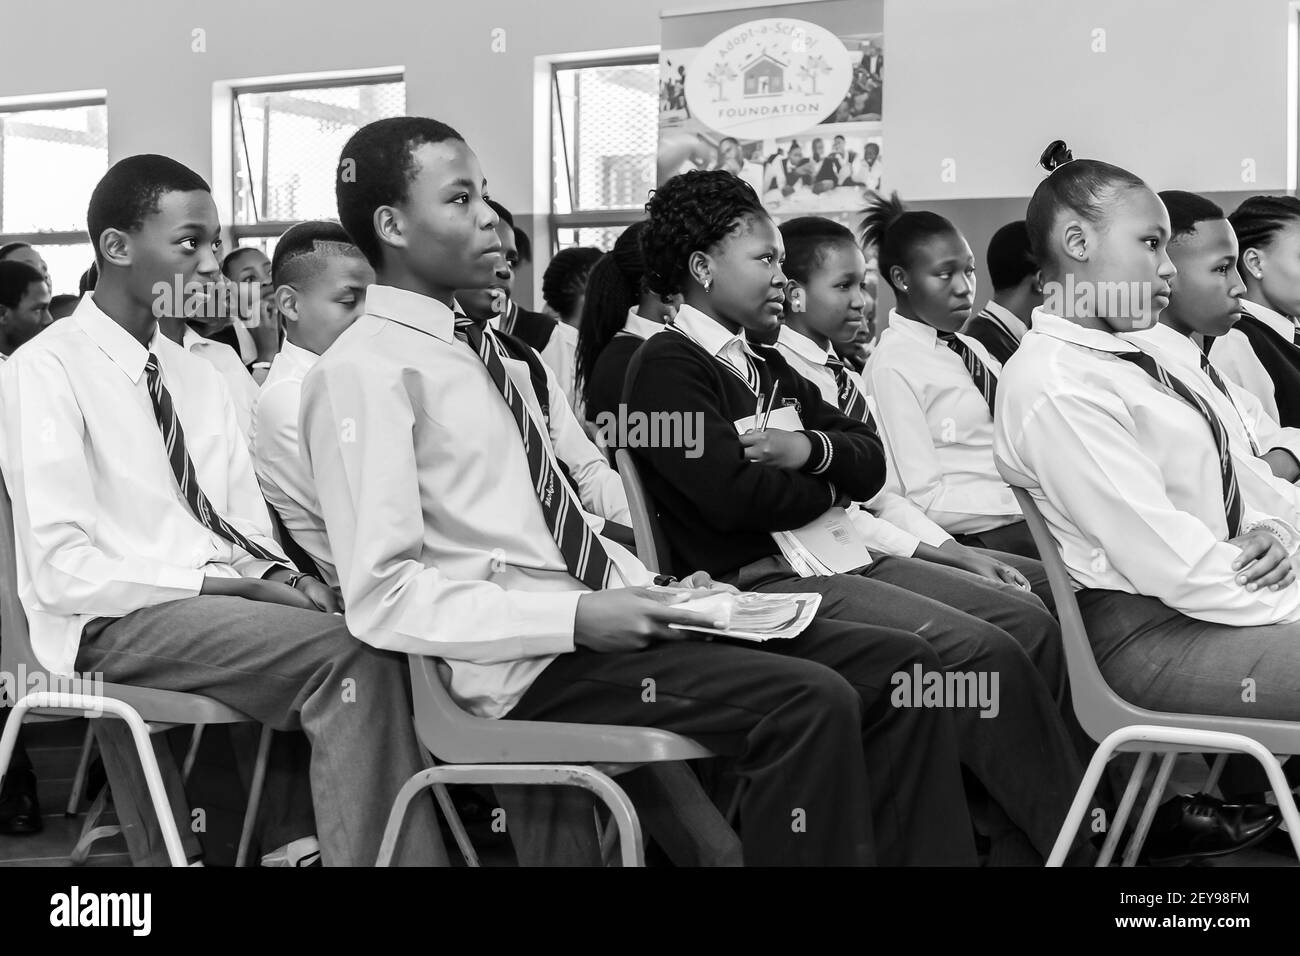 JOHANNESBURG, SOUTH AFRICA - Jan 05, 2021: Johannesburg, South Africa - March 22 2017: African High School students in a classroom Stock Photo